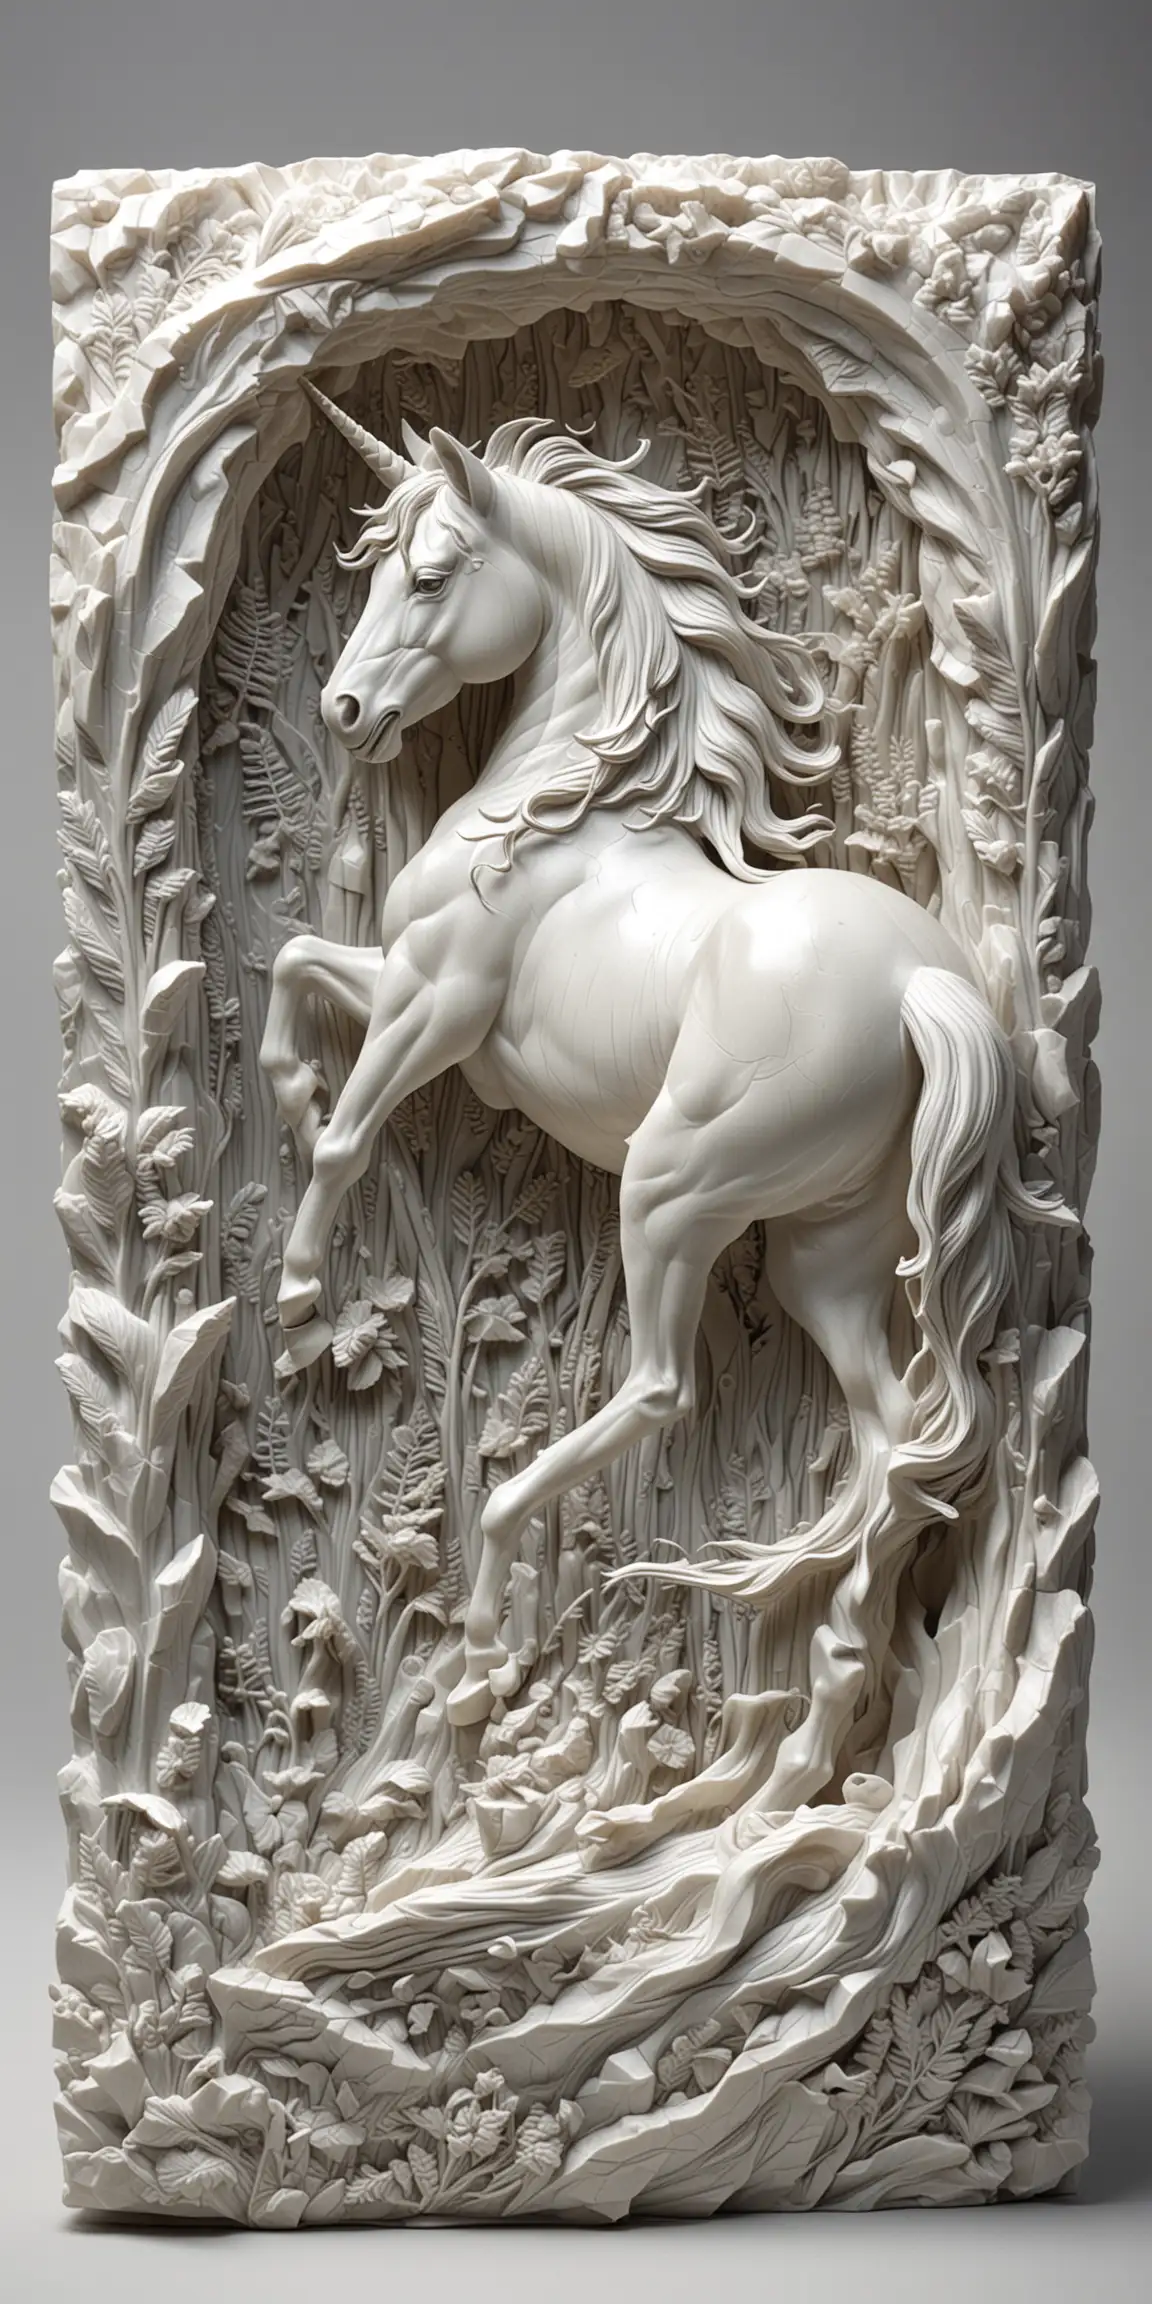 unicorn, carved in translucent alabaster, 3d relief, topographical gray scale